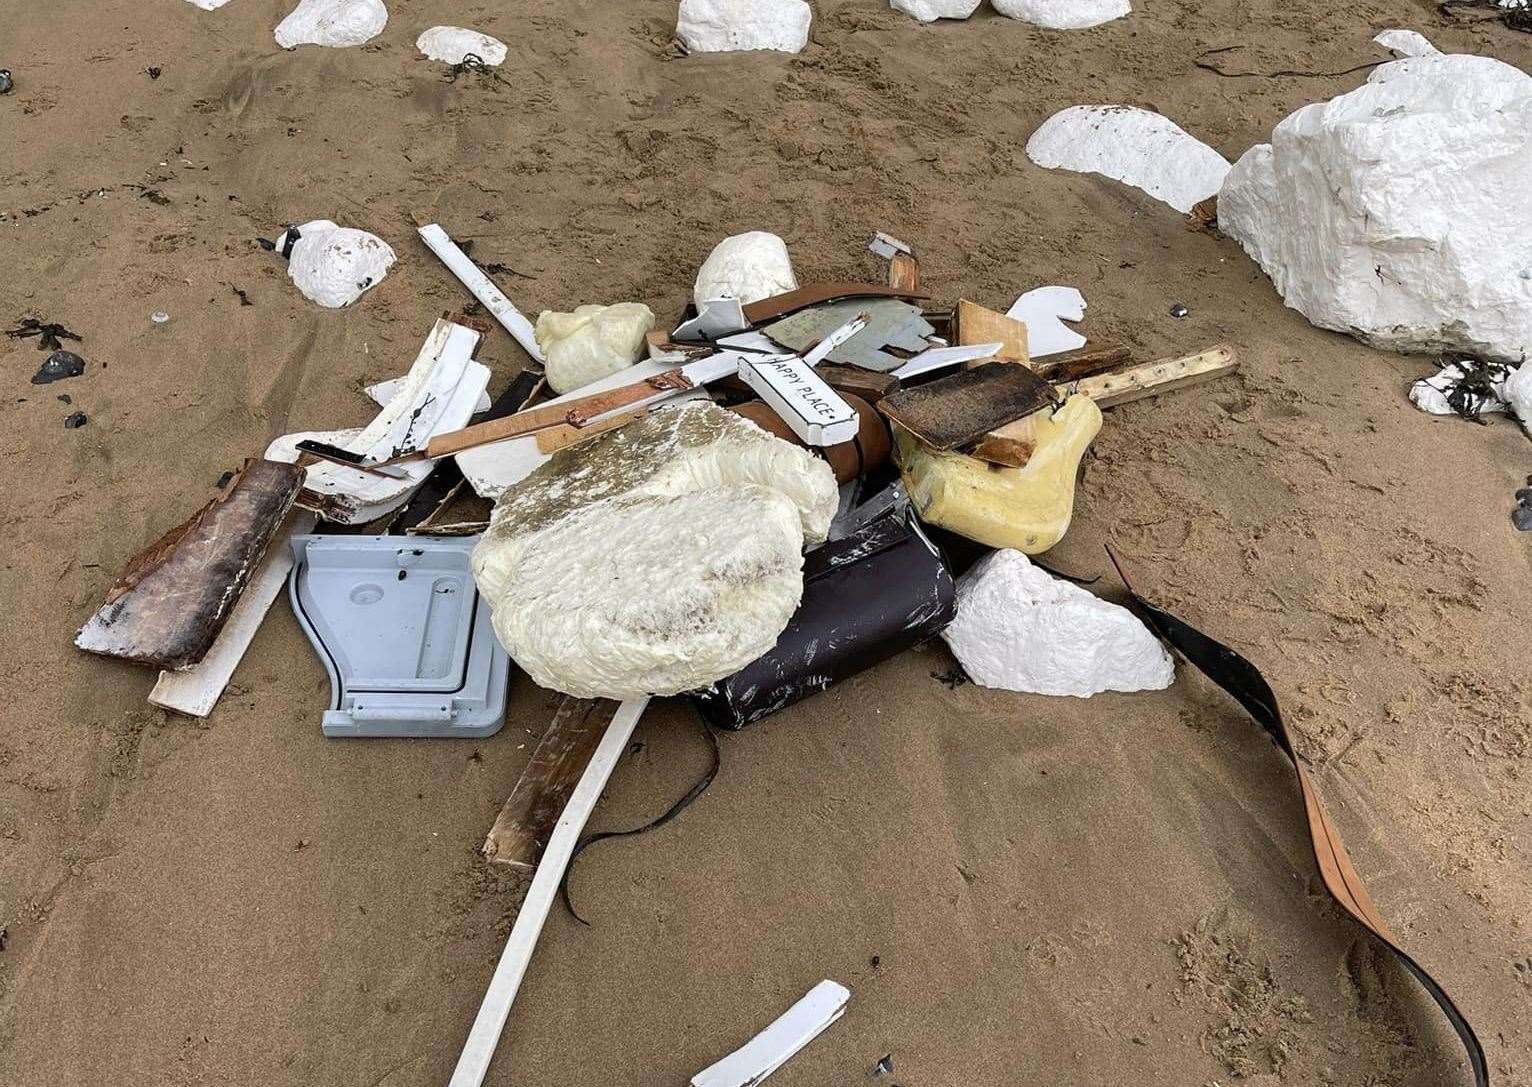 Parts of the vessel and its contents were found on the shore in Broadstairs. Picture: HM Coastguard Margate